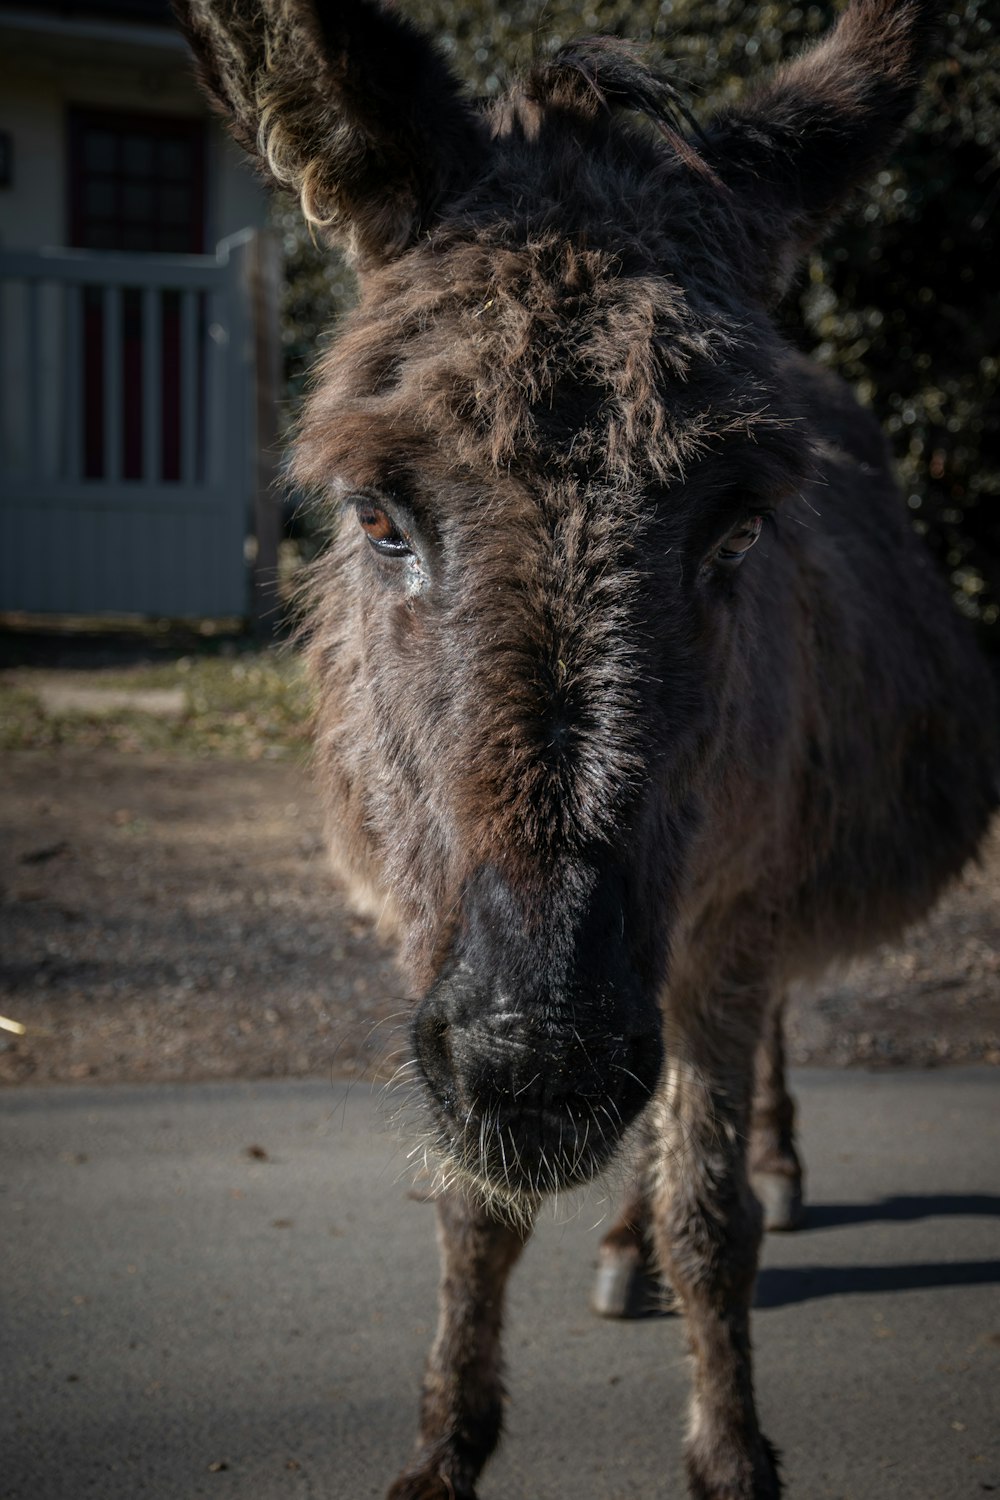 a close up of a donkey on a road